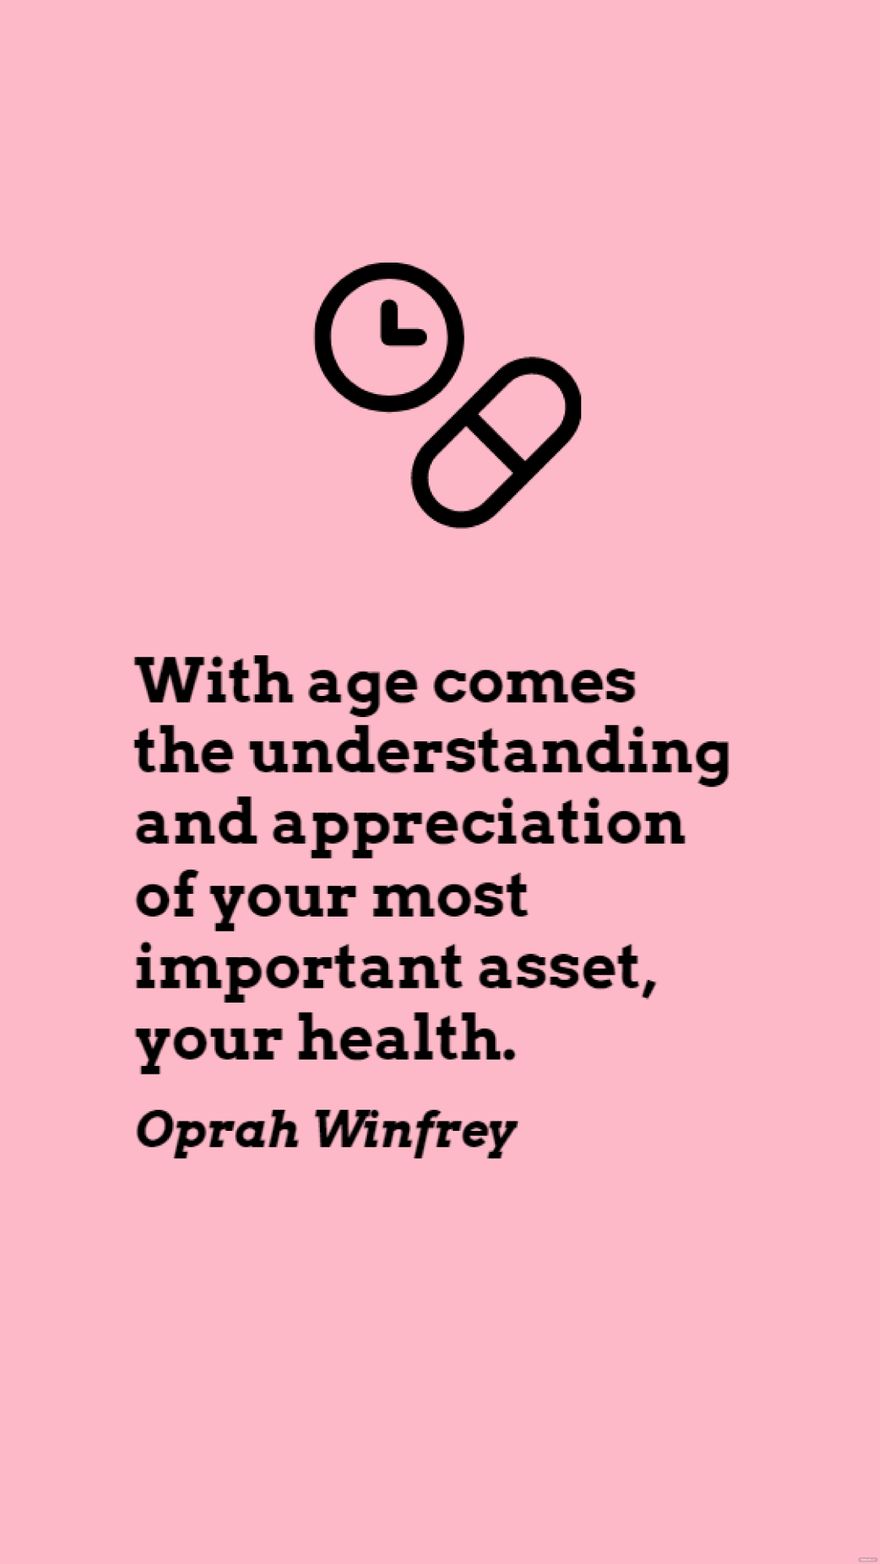 Oprah Winfrey - With age comes the understanding and appreciation of your most important asset, your health.